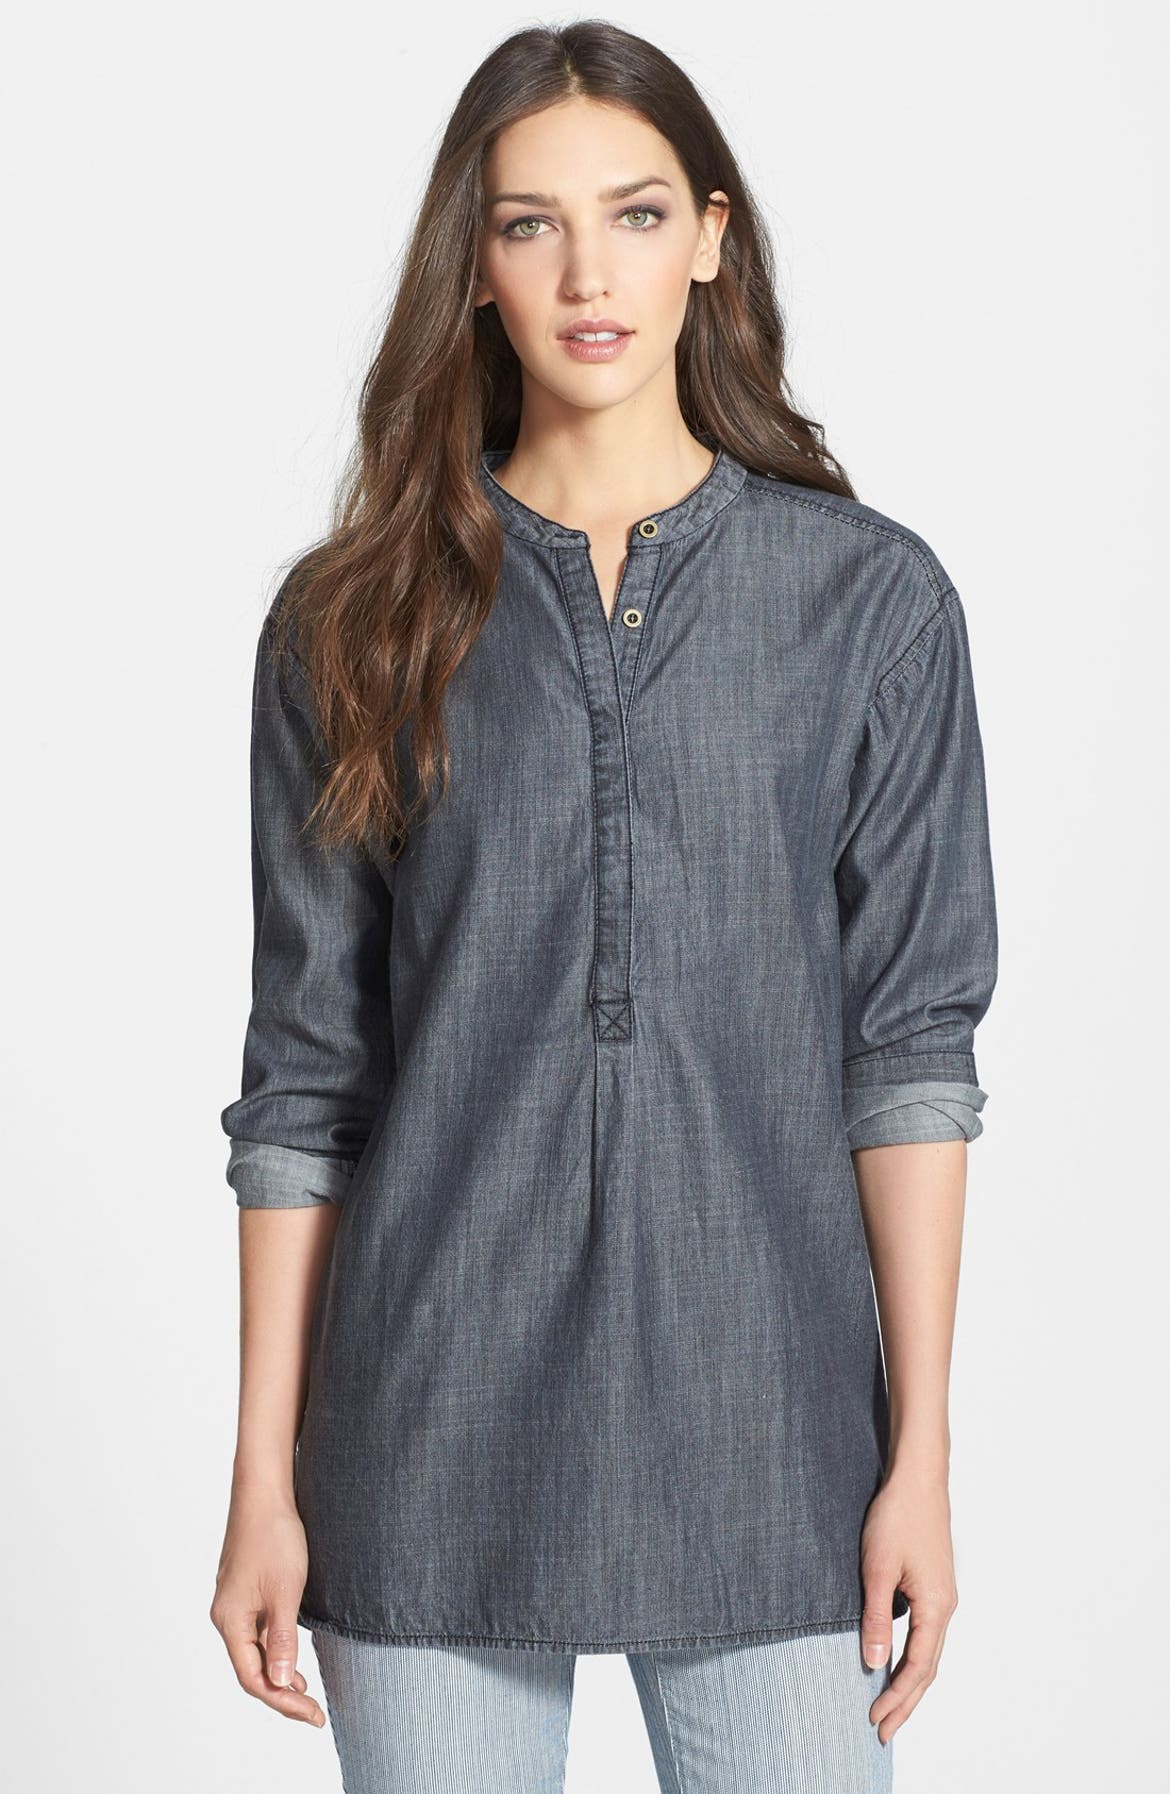 Eileen Fisher The Fisher Project Chambray Henley Tunic Top | Nordstrom